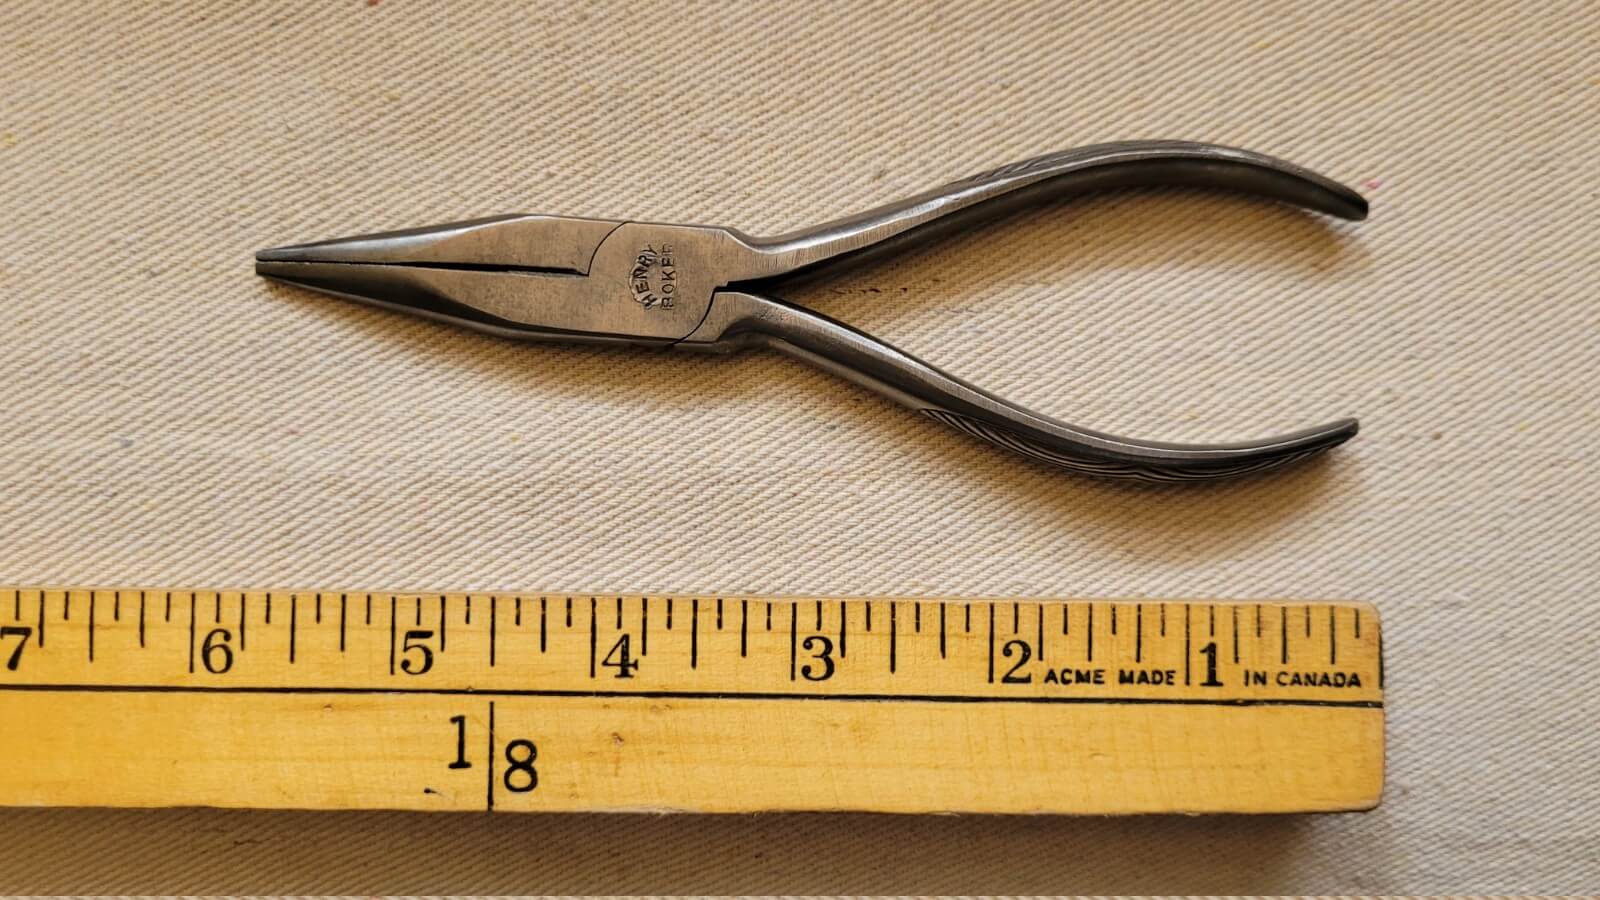 Vintage Henry Boker Tools Needle Nose Pliers Made in Germany - Vintage and Antique Collectible Crafts Hand Tools